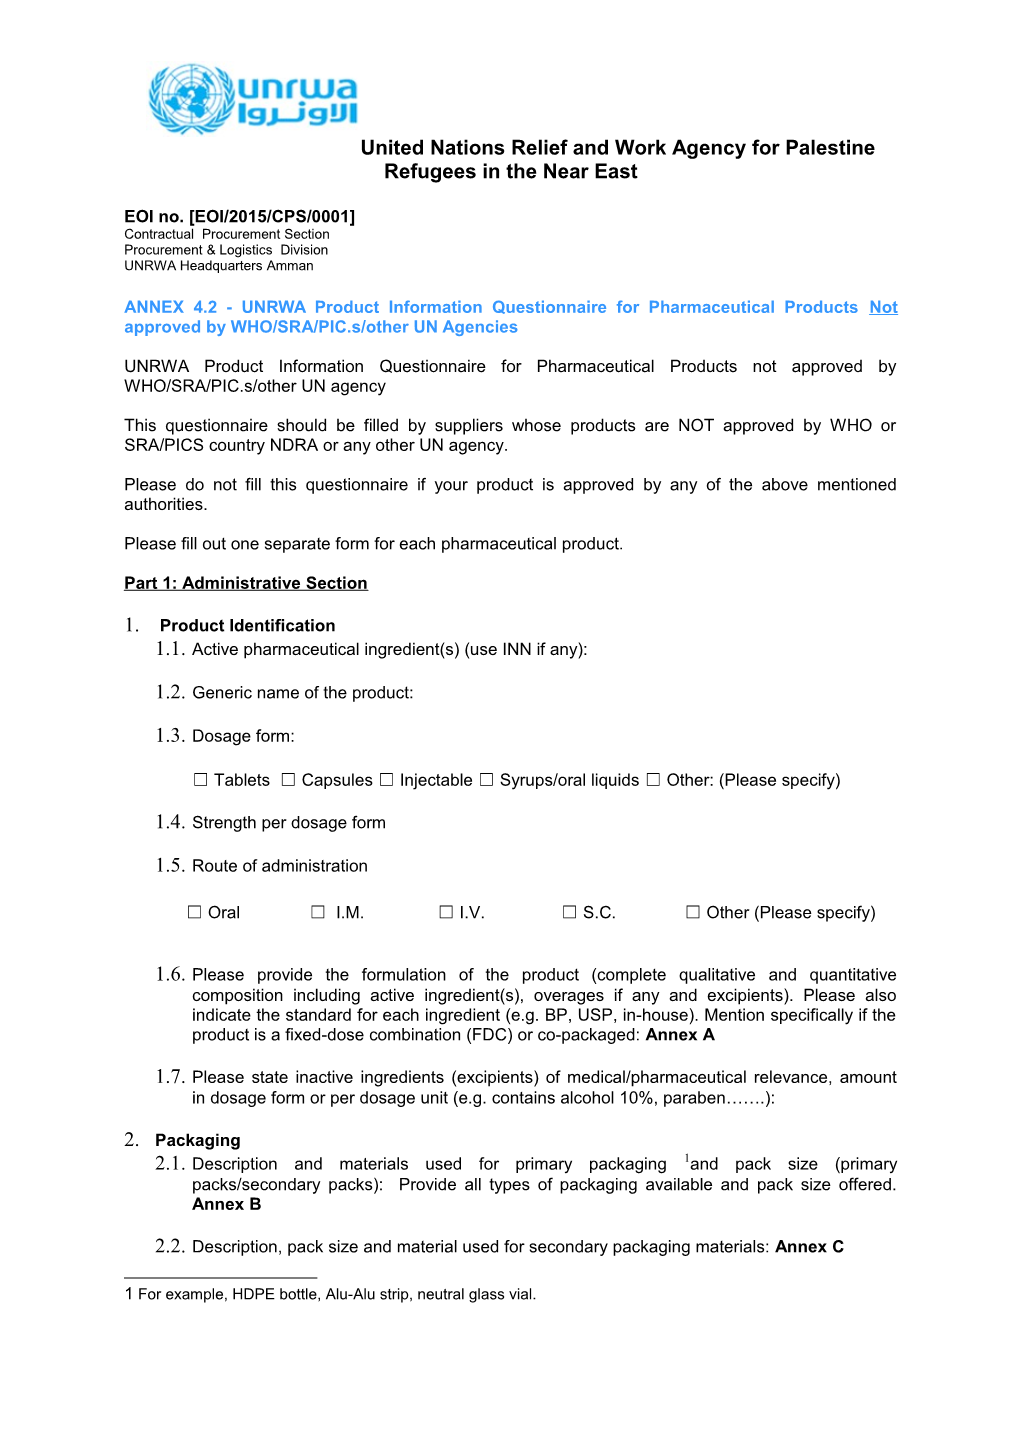 ANNEX 4.2 - UNRWA Product Information Questionnaire for Pharmaceutical Products Not Approved